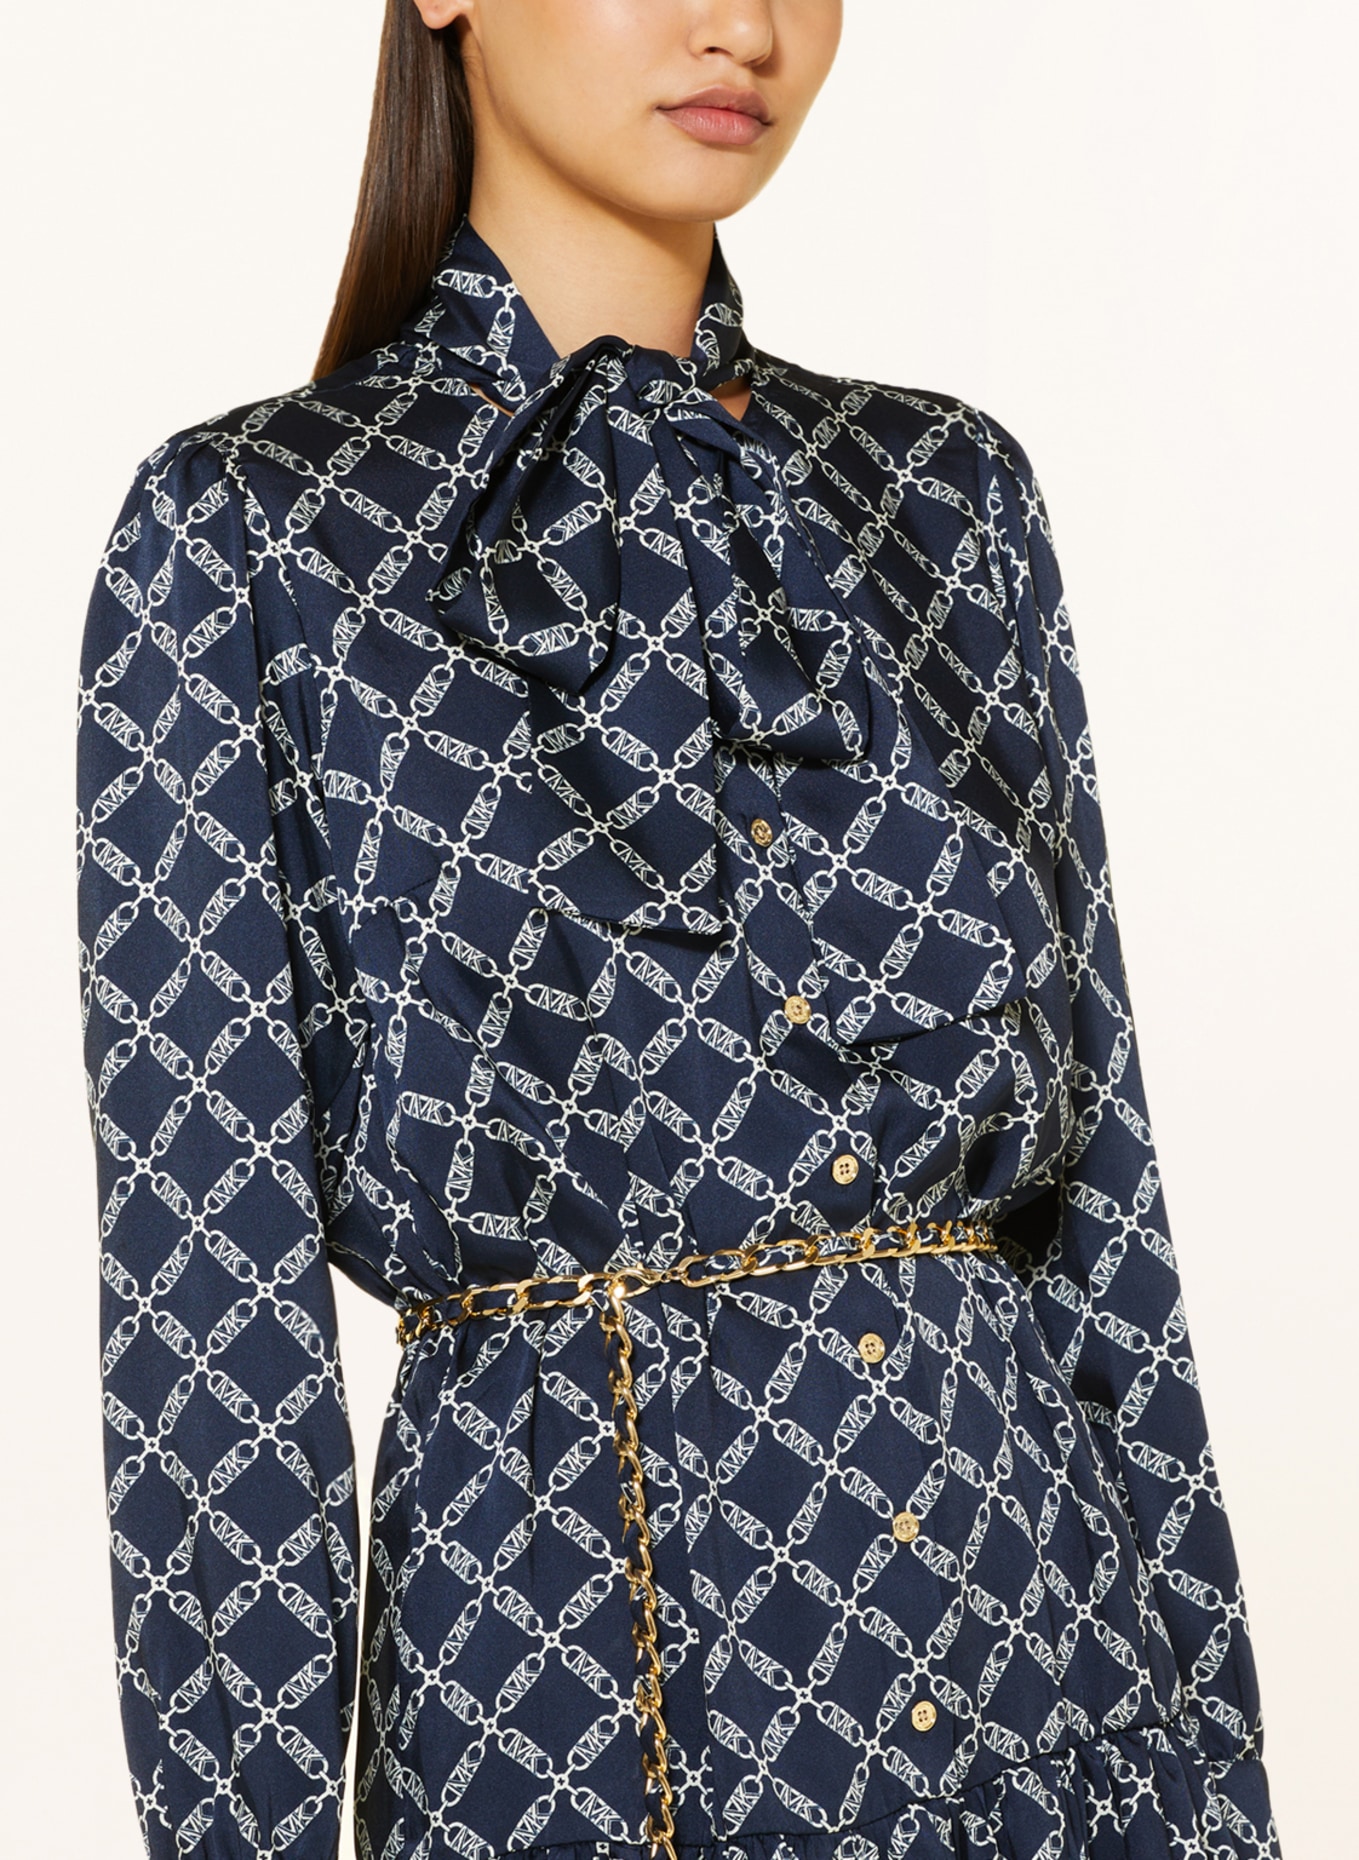 MICHAEL KORS Shirt dress with bow, Color: DARK BLUE/ WHITE (Image 5)